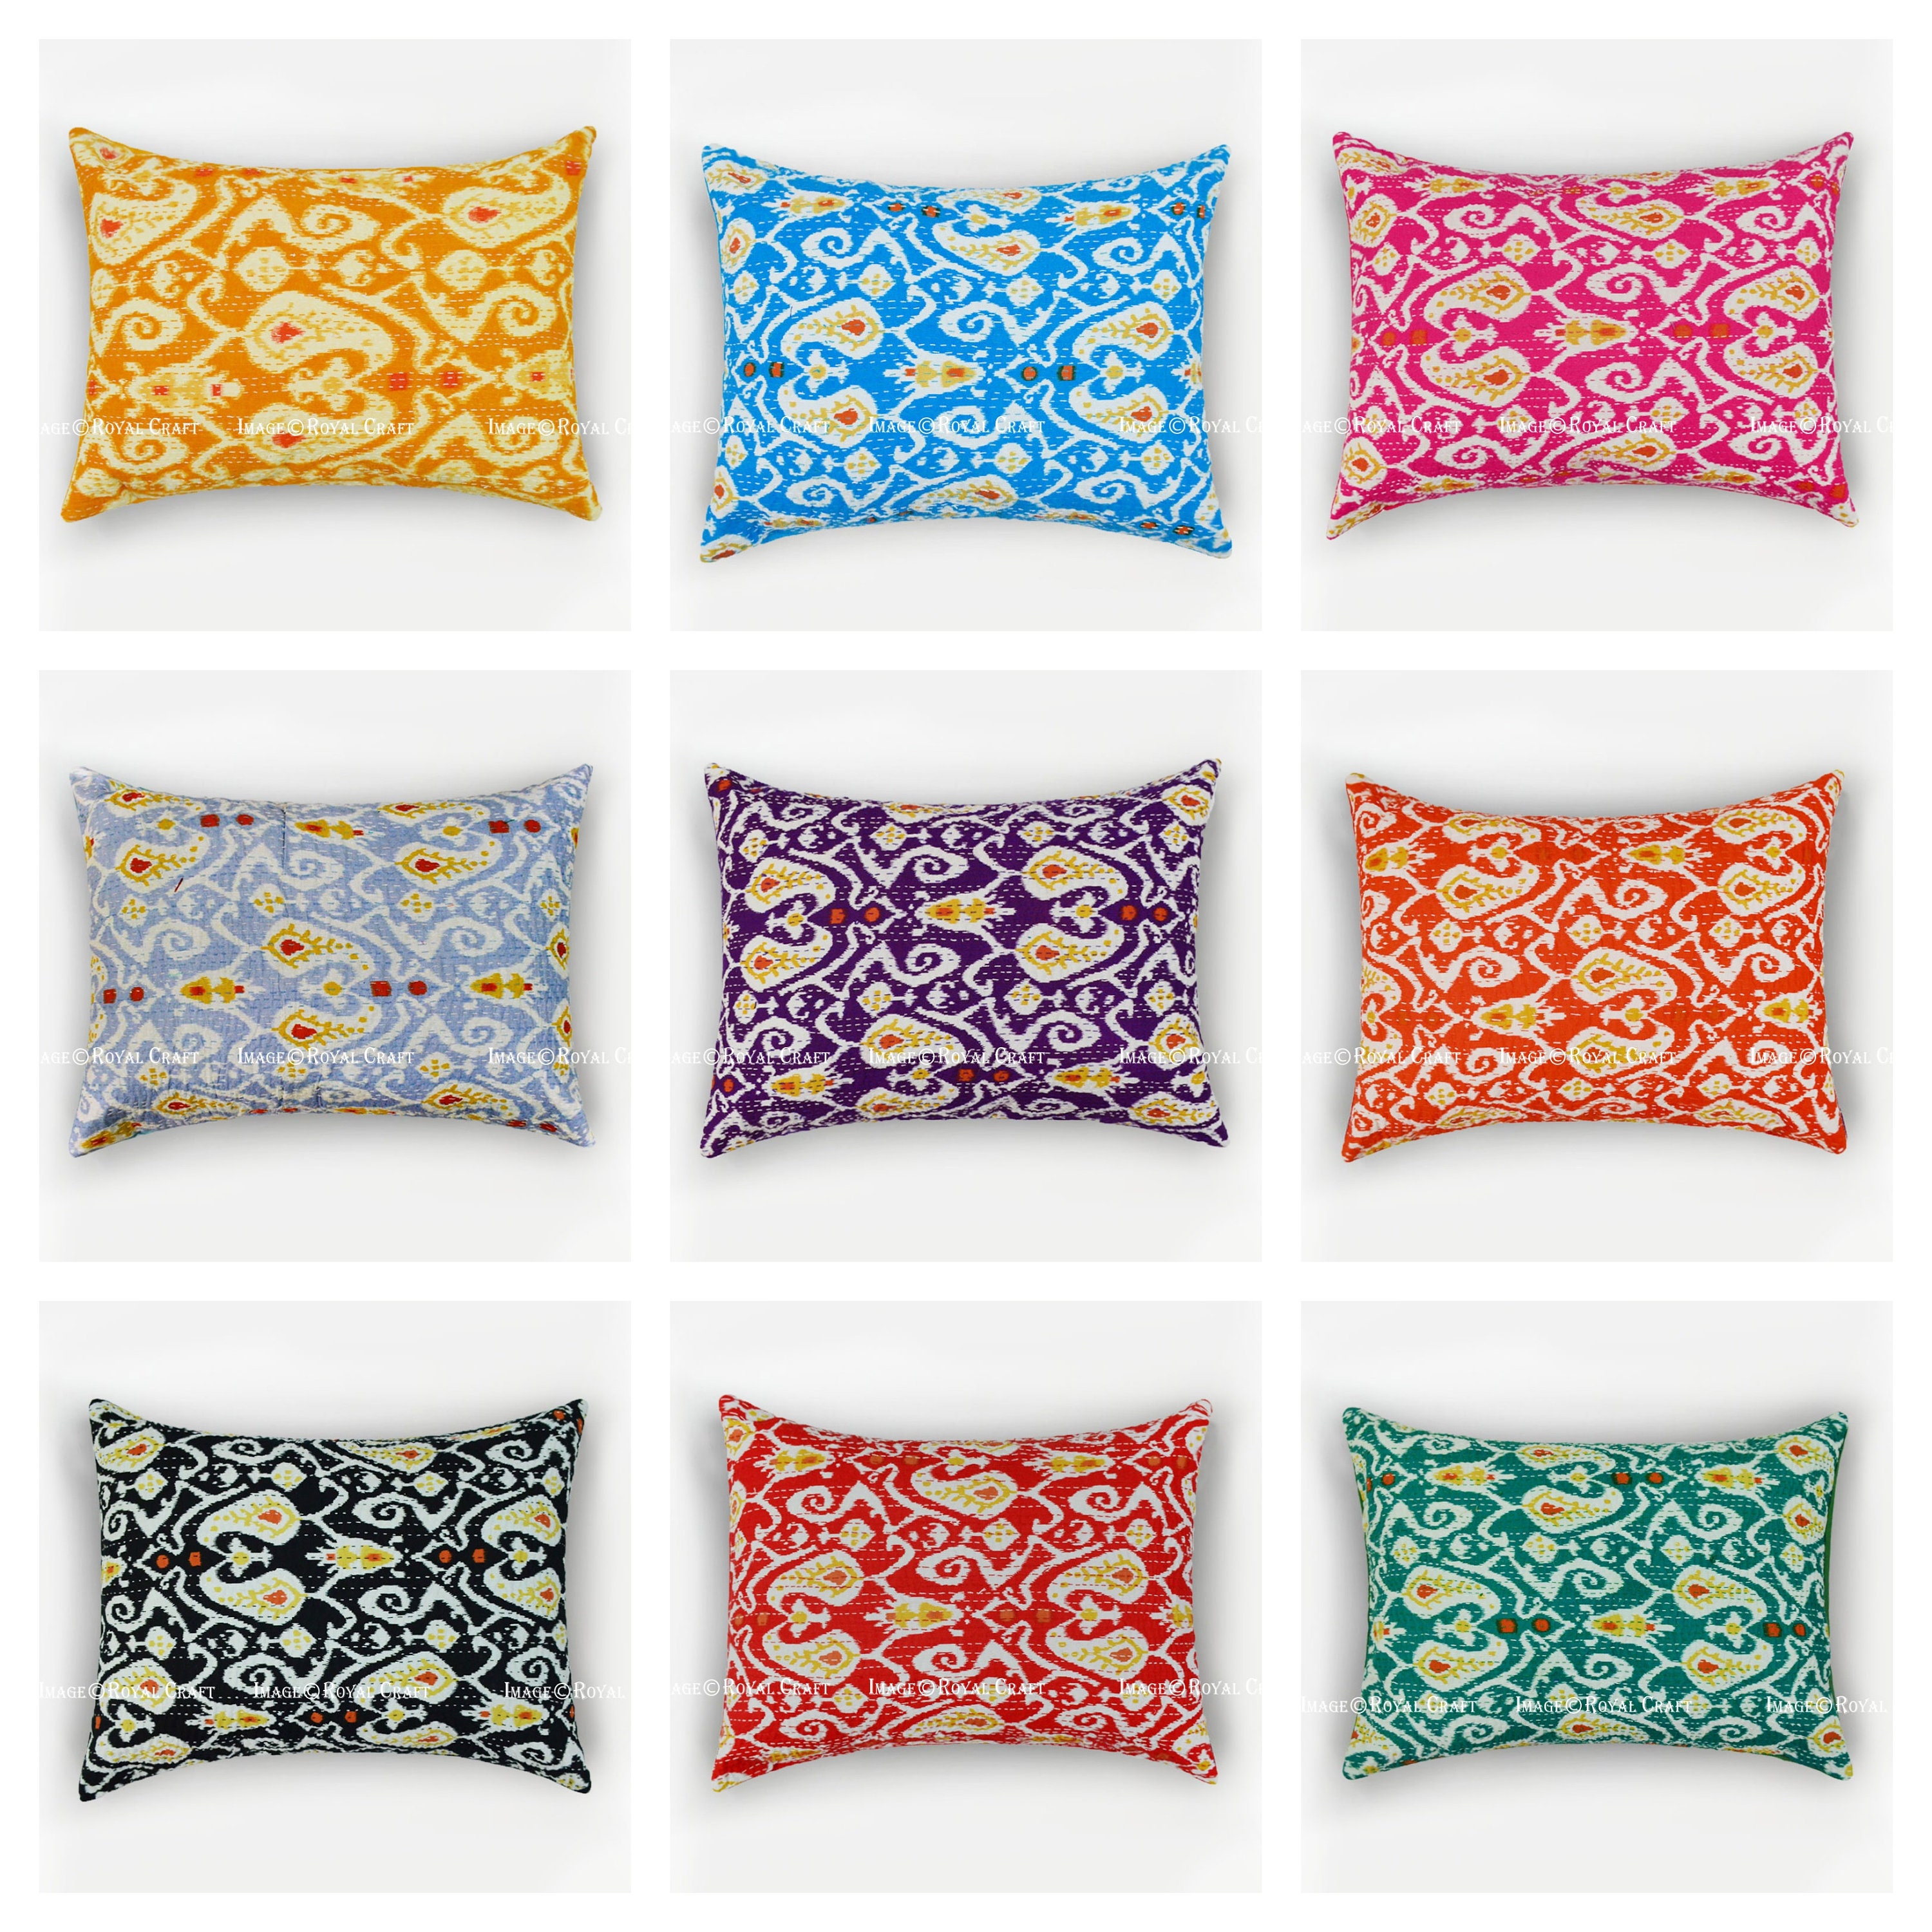 Throw Pillow Covers and Cases, Set of 4, Modern, Boho, Decorative Cover Sets